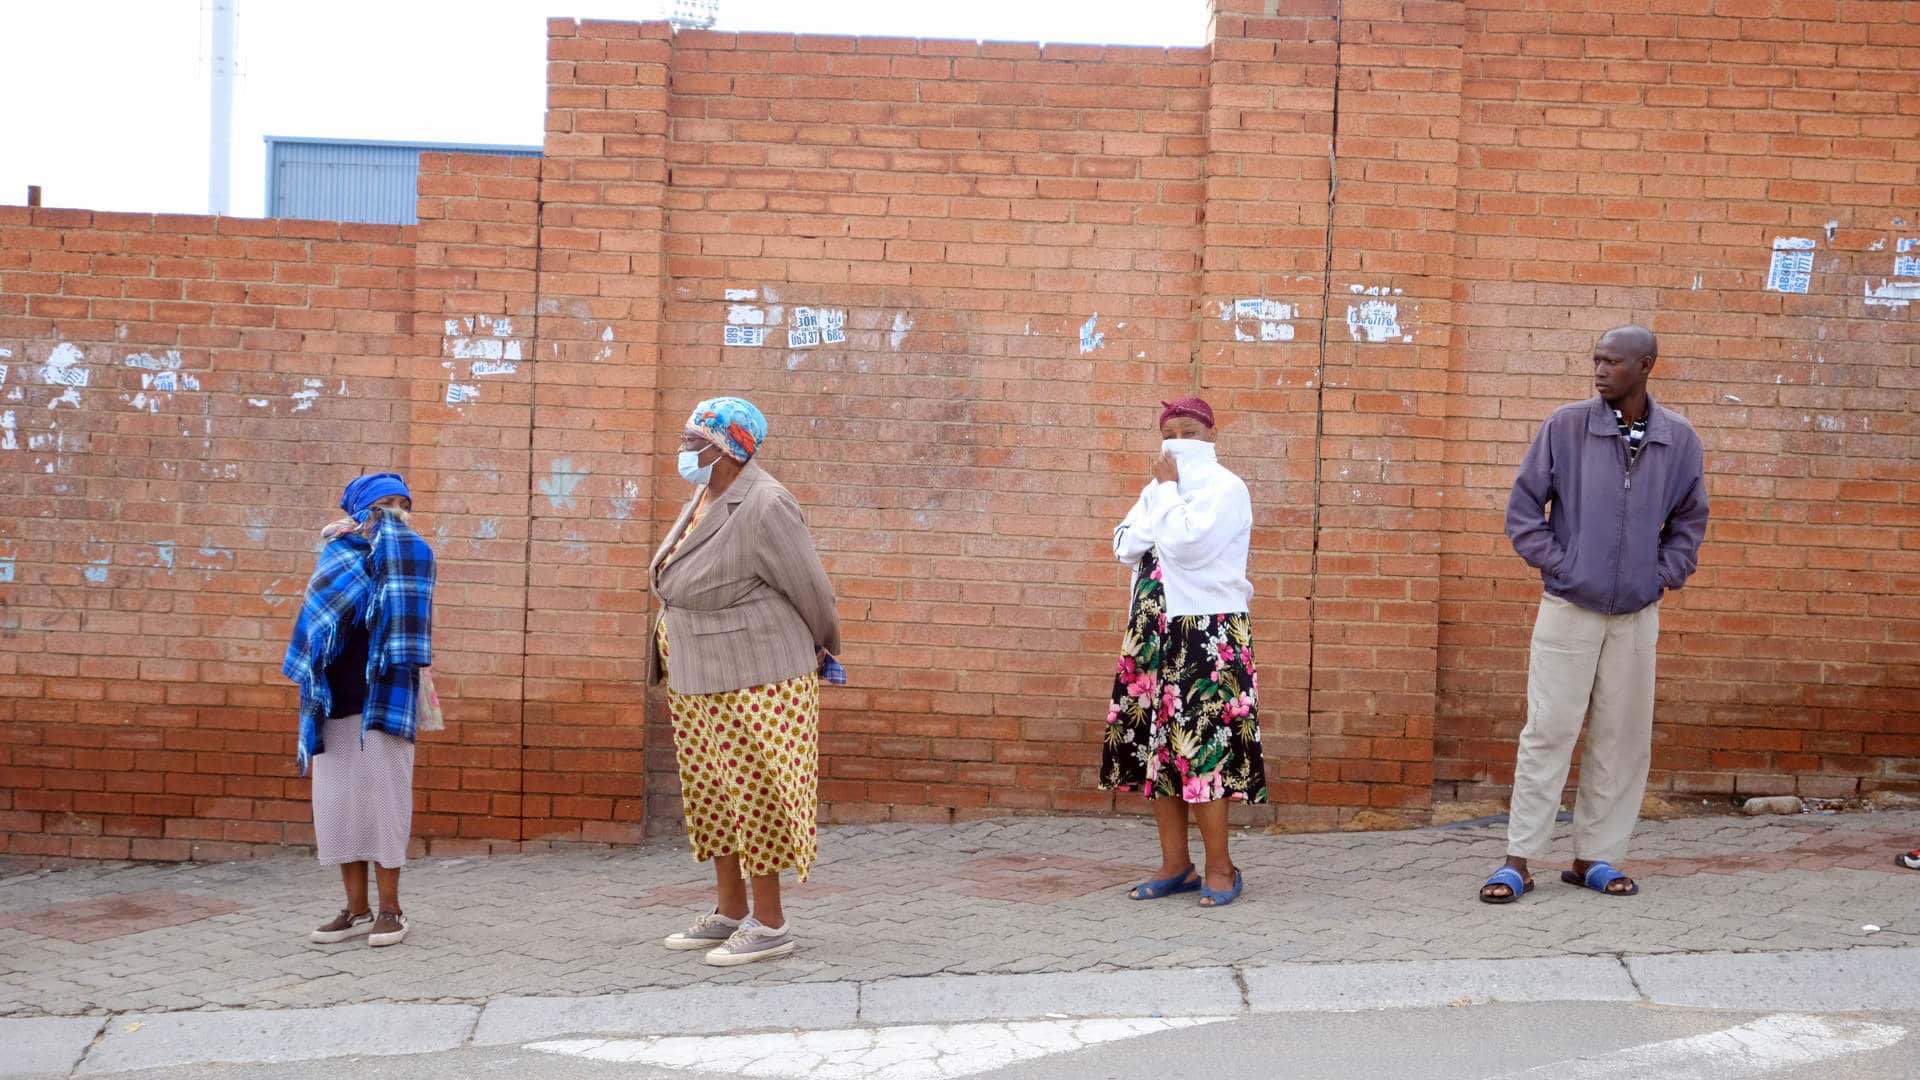 Residents wait in line for a Covid-19 test in Alexandra, South Africa.